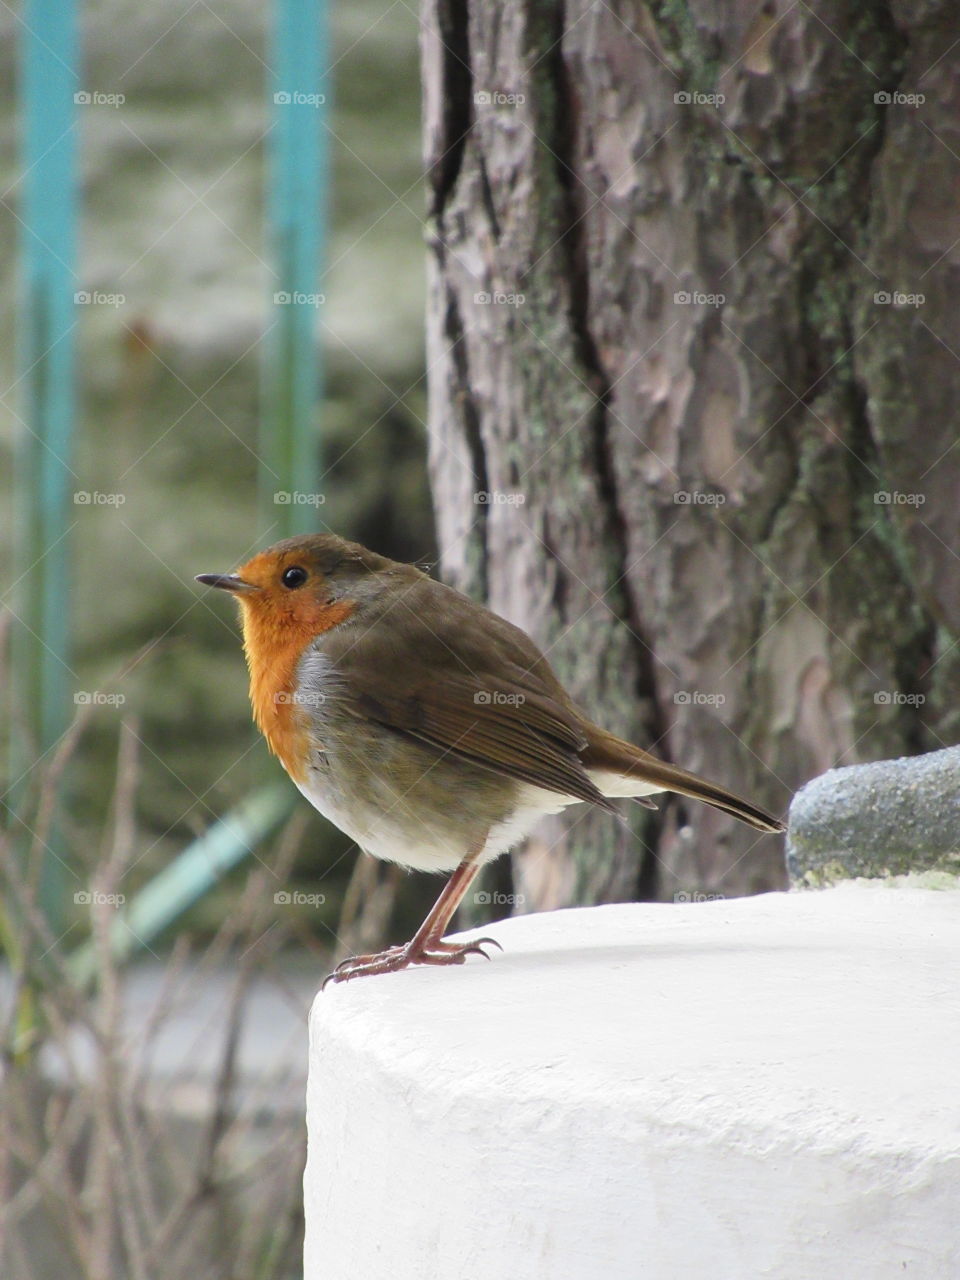 A robin next to a tree with turquoise fencing in background